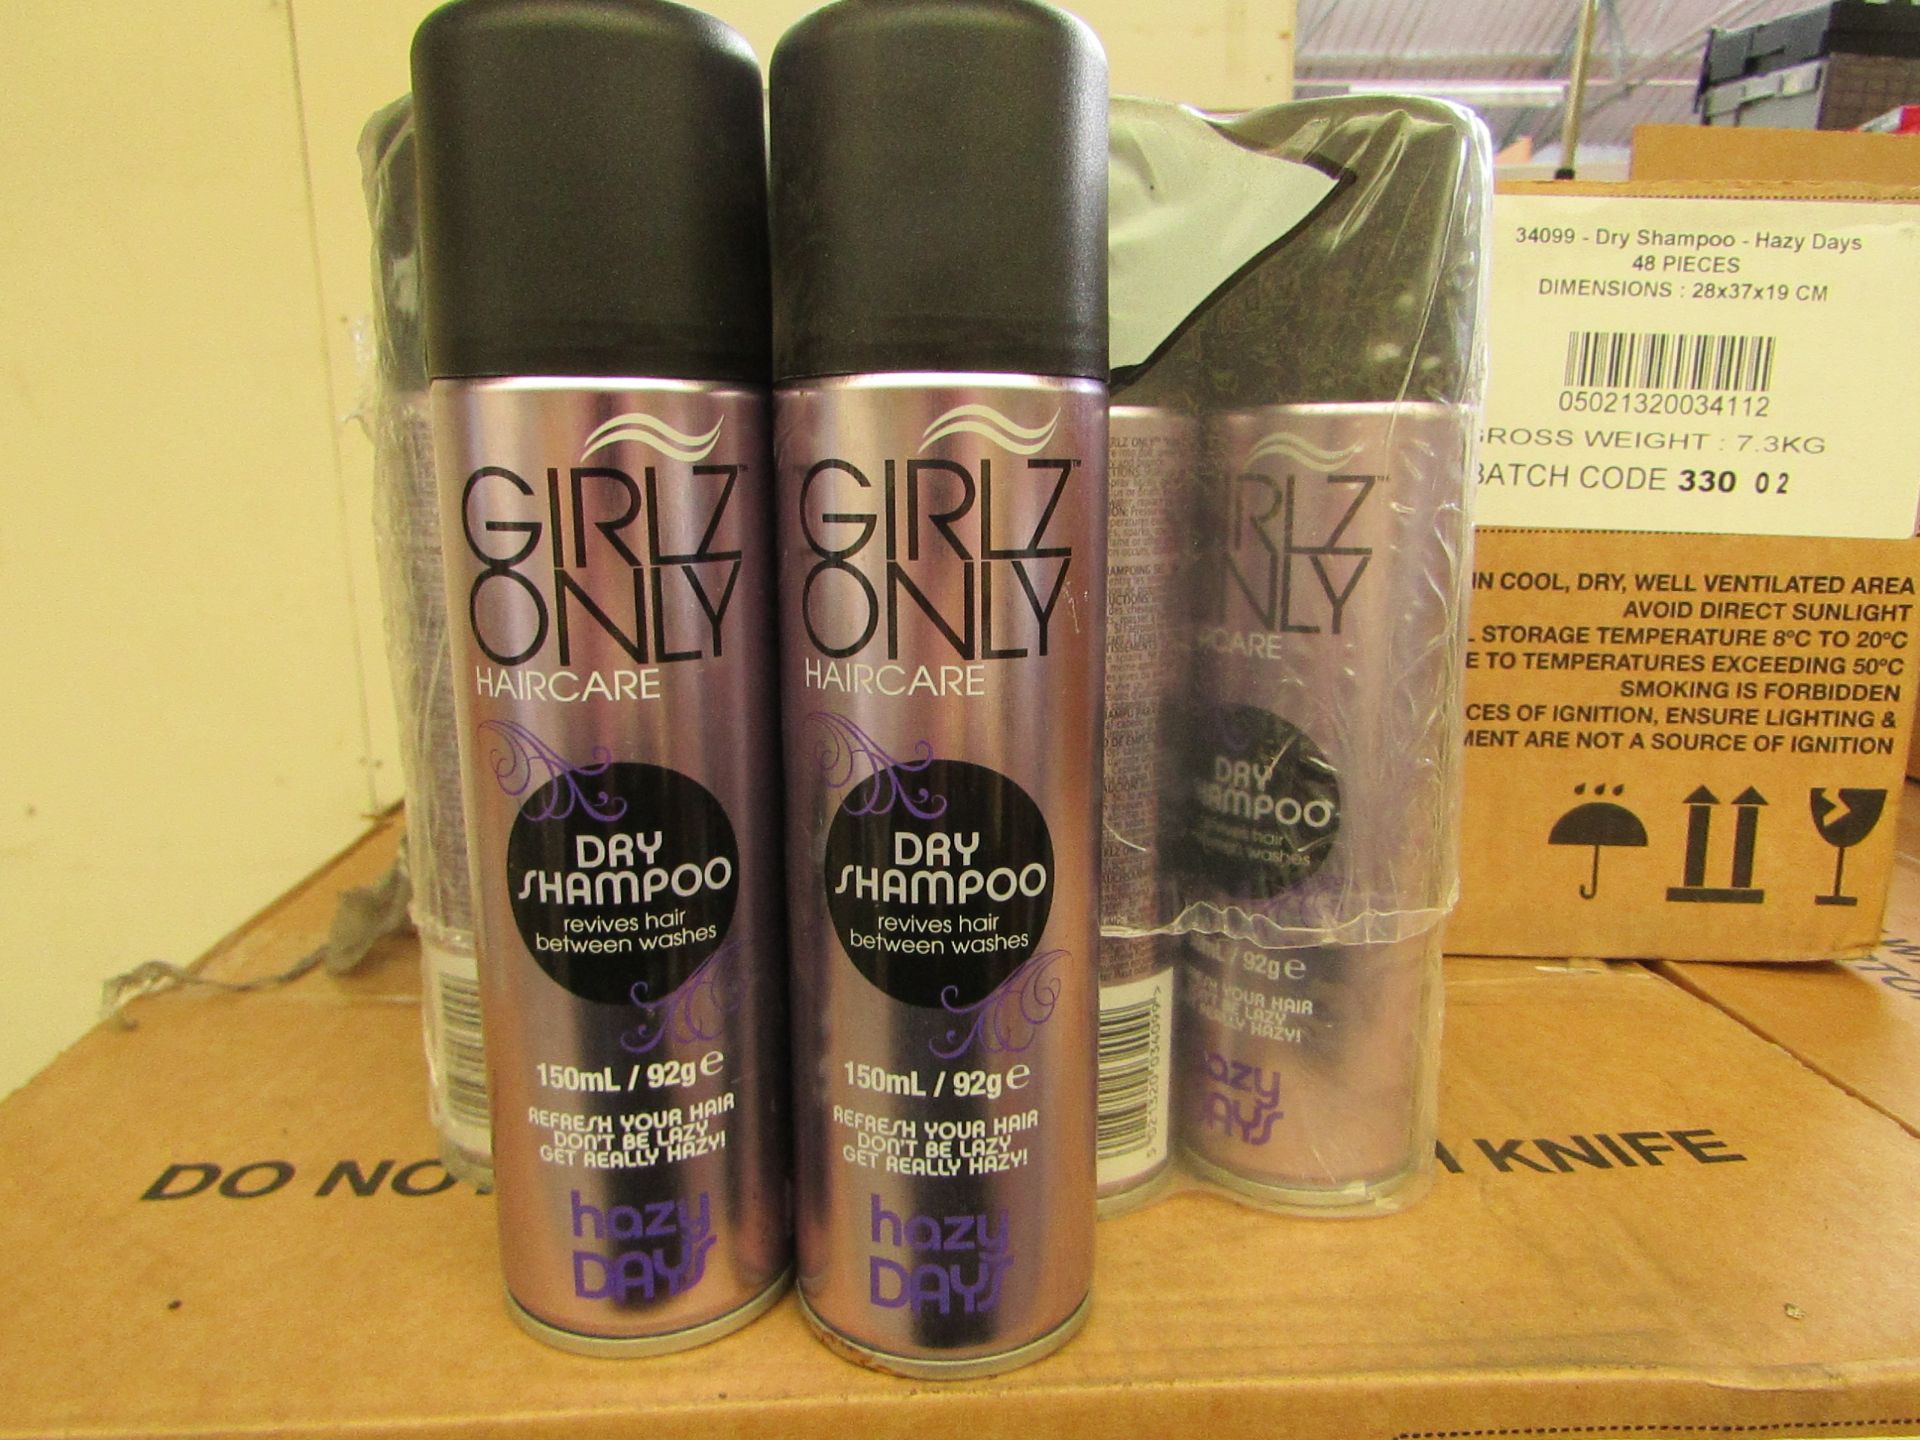 Box of 48 Girlz Only - Dry Shampoo (150ml) - Boxed.